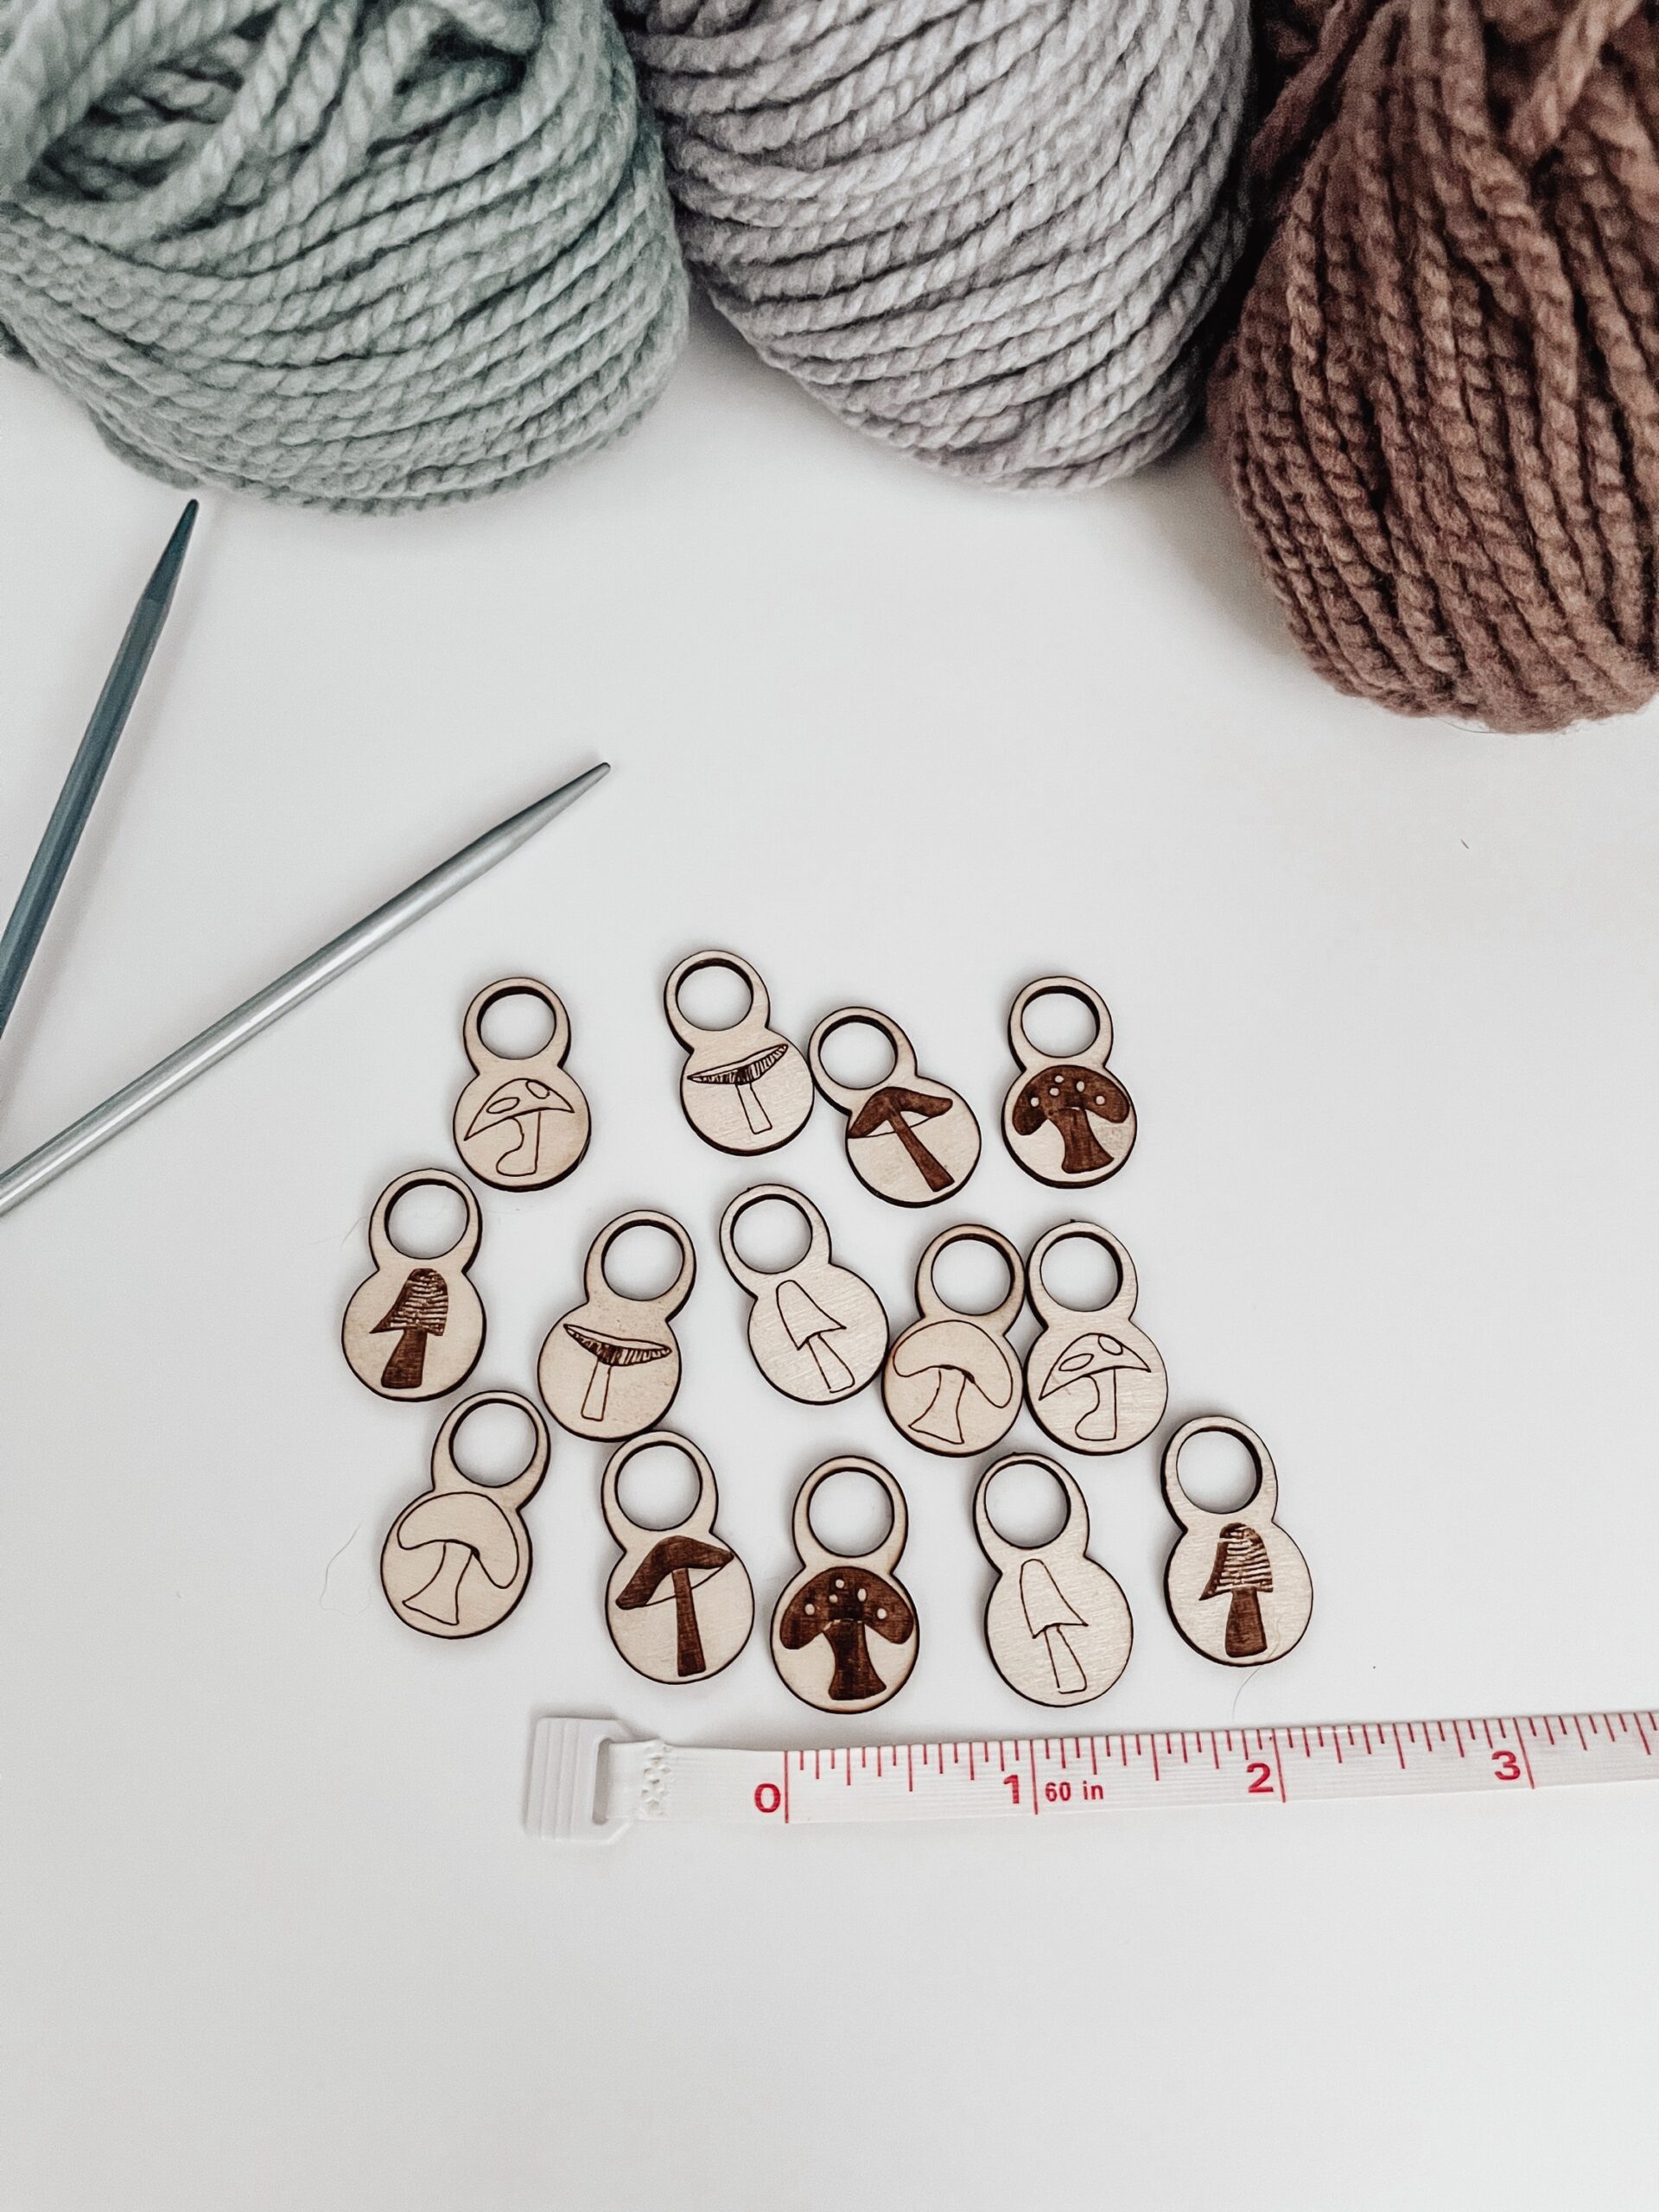 A total of 14 wood stitch markers with a variety of hand-drawn mushroom designs are displayed next to a measuring tape that shows they're approximately 1/4" wide. A pair of metal knitting needles and three skeins of merino yarn are in the background.